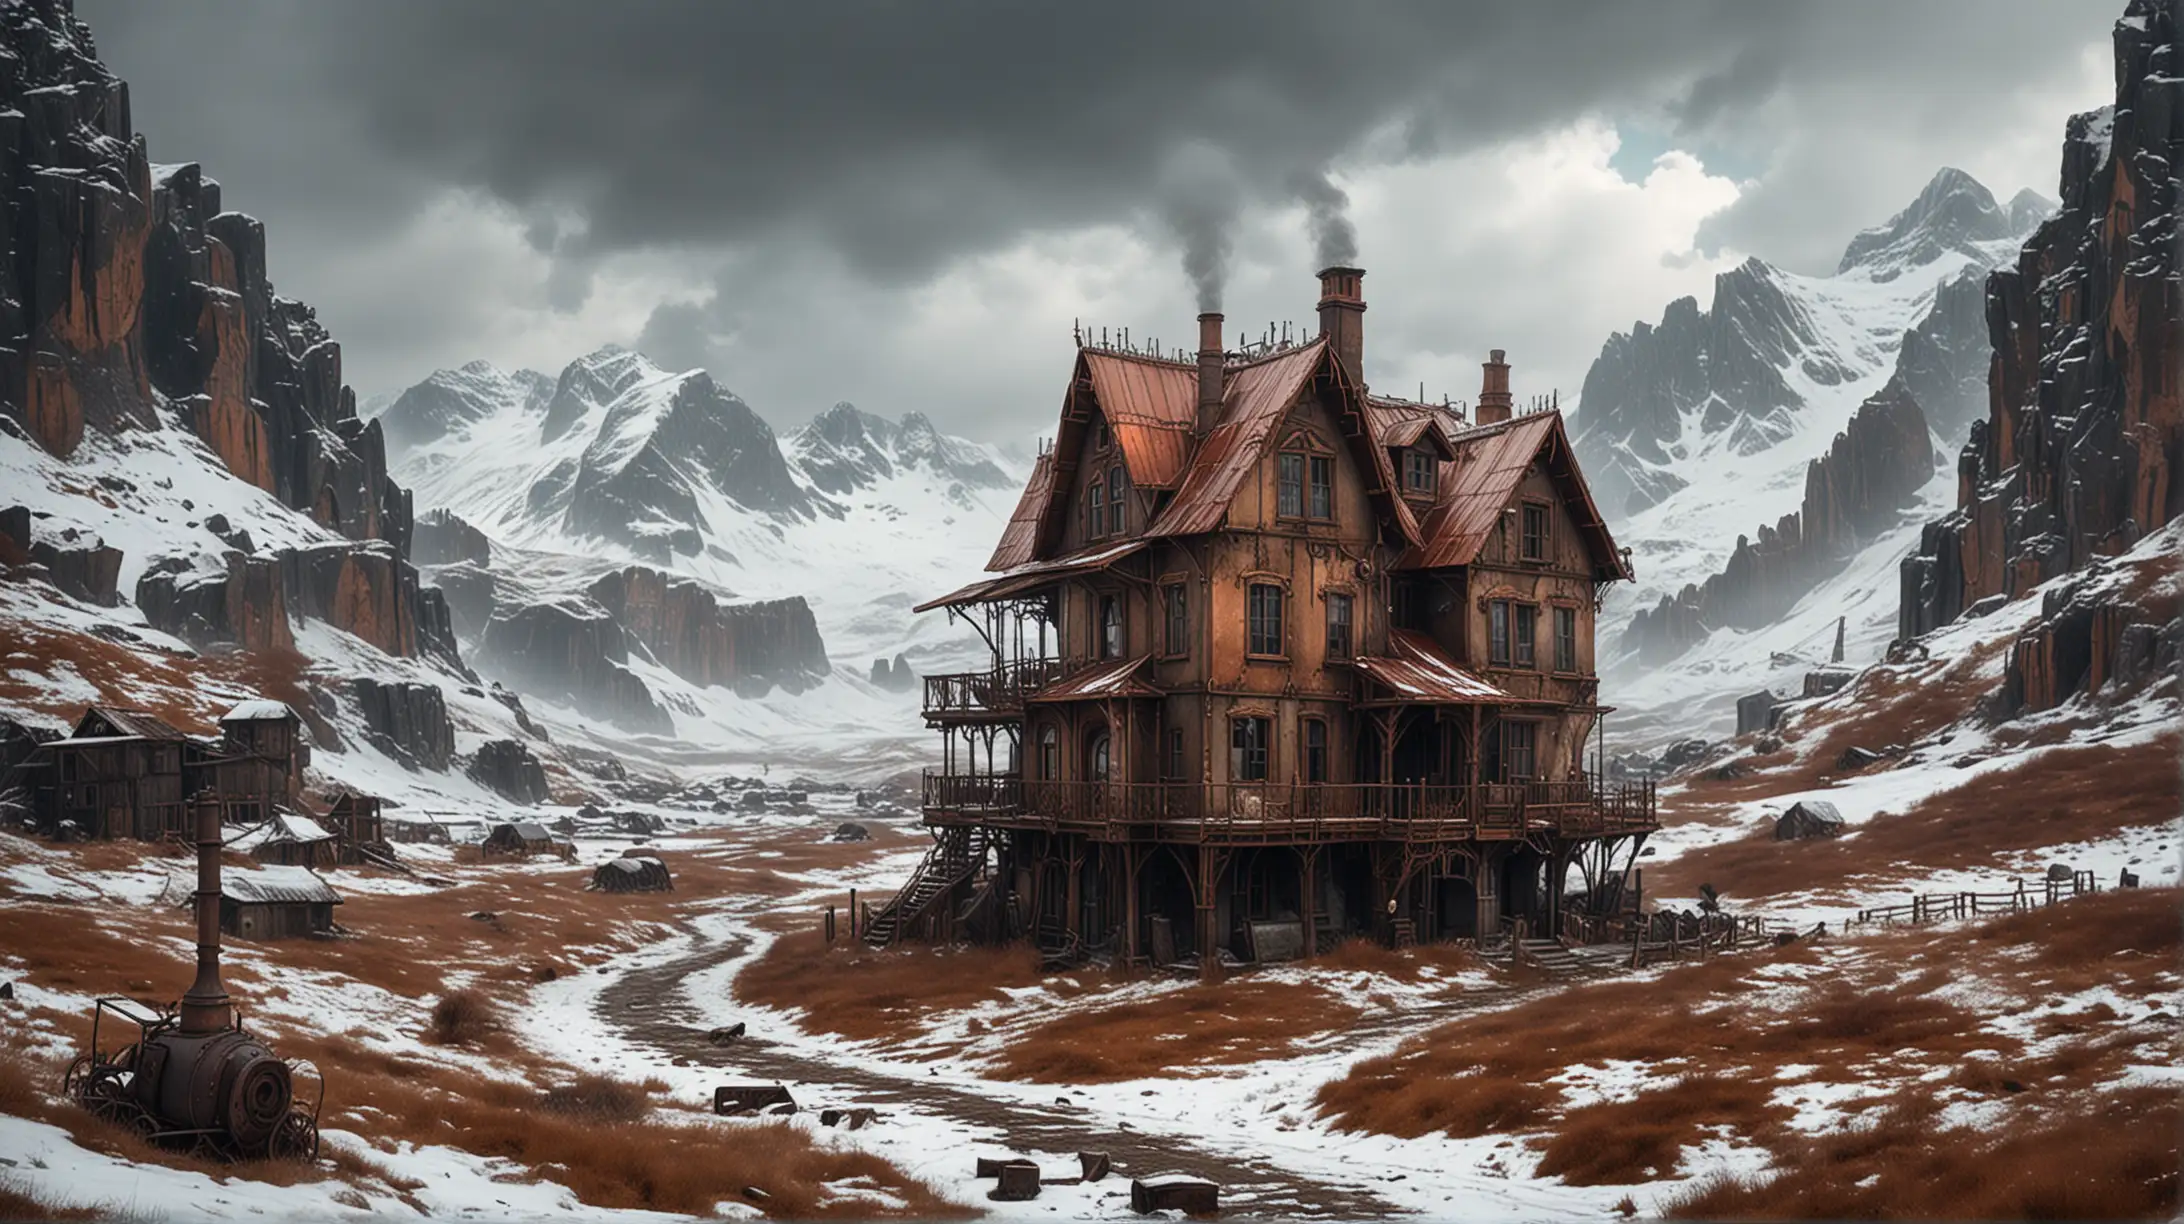 Lonely HalfRuined Steampunk House in Snowy Mountain Valley